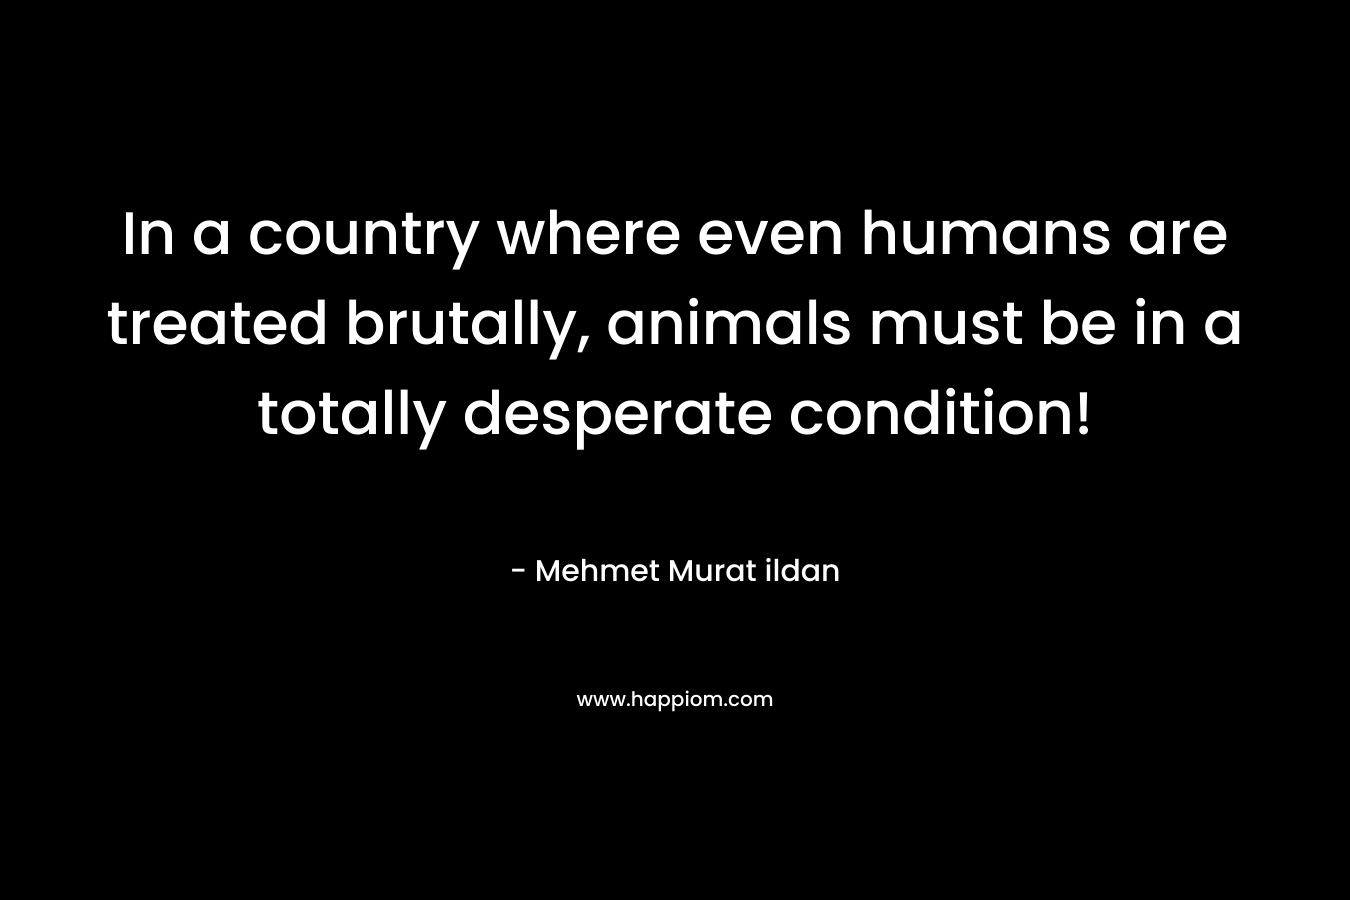 In a country where even humans are treated brutally, animals must be in a totally desperate condition! – Mehmet Murat ildan